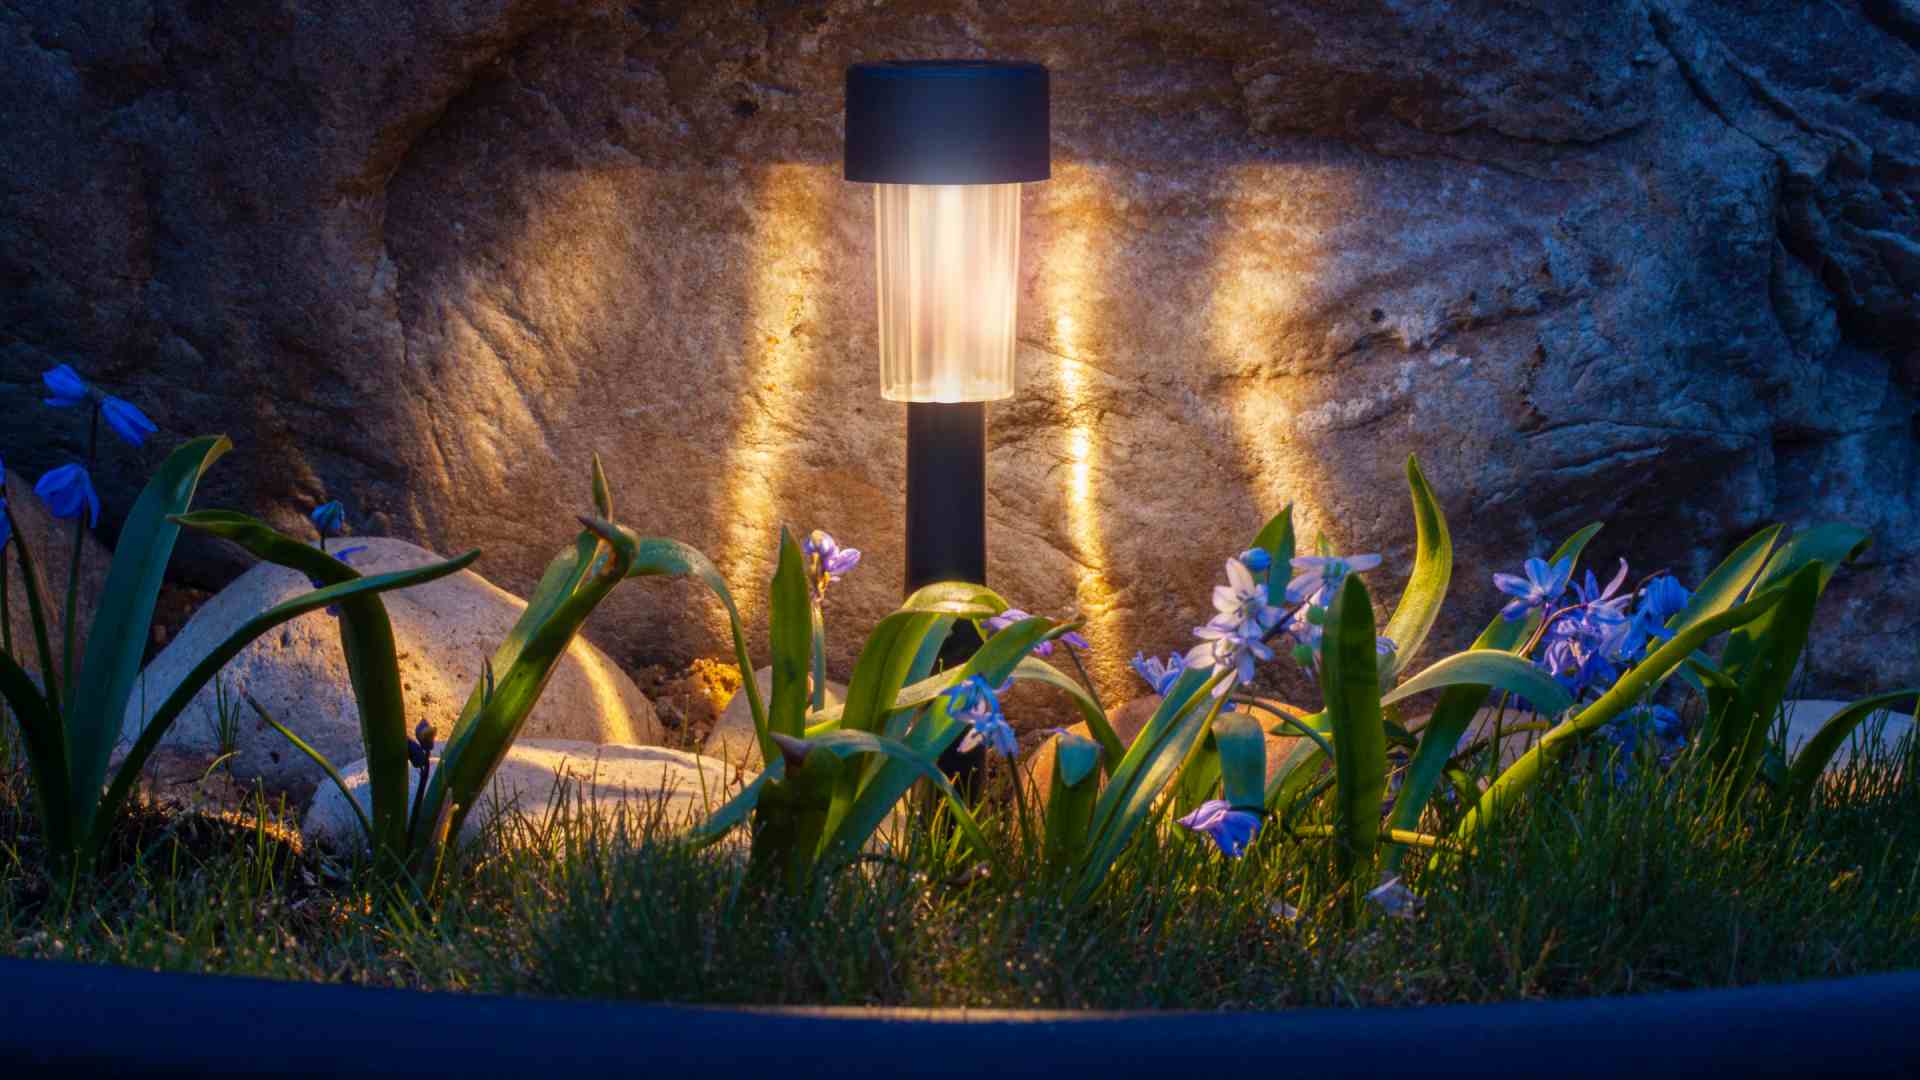 A solar lamp shines in a garden while plants, grass, and rocks of various different sizes surround it.